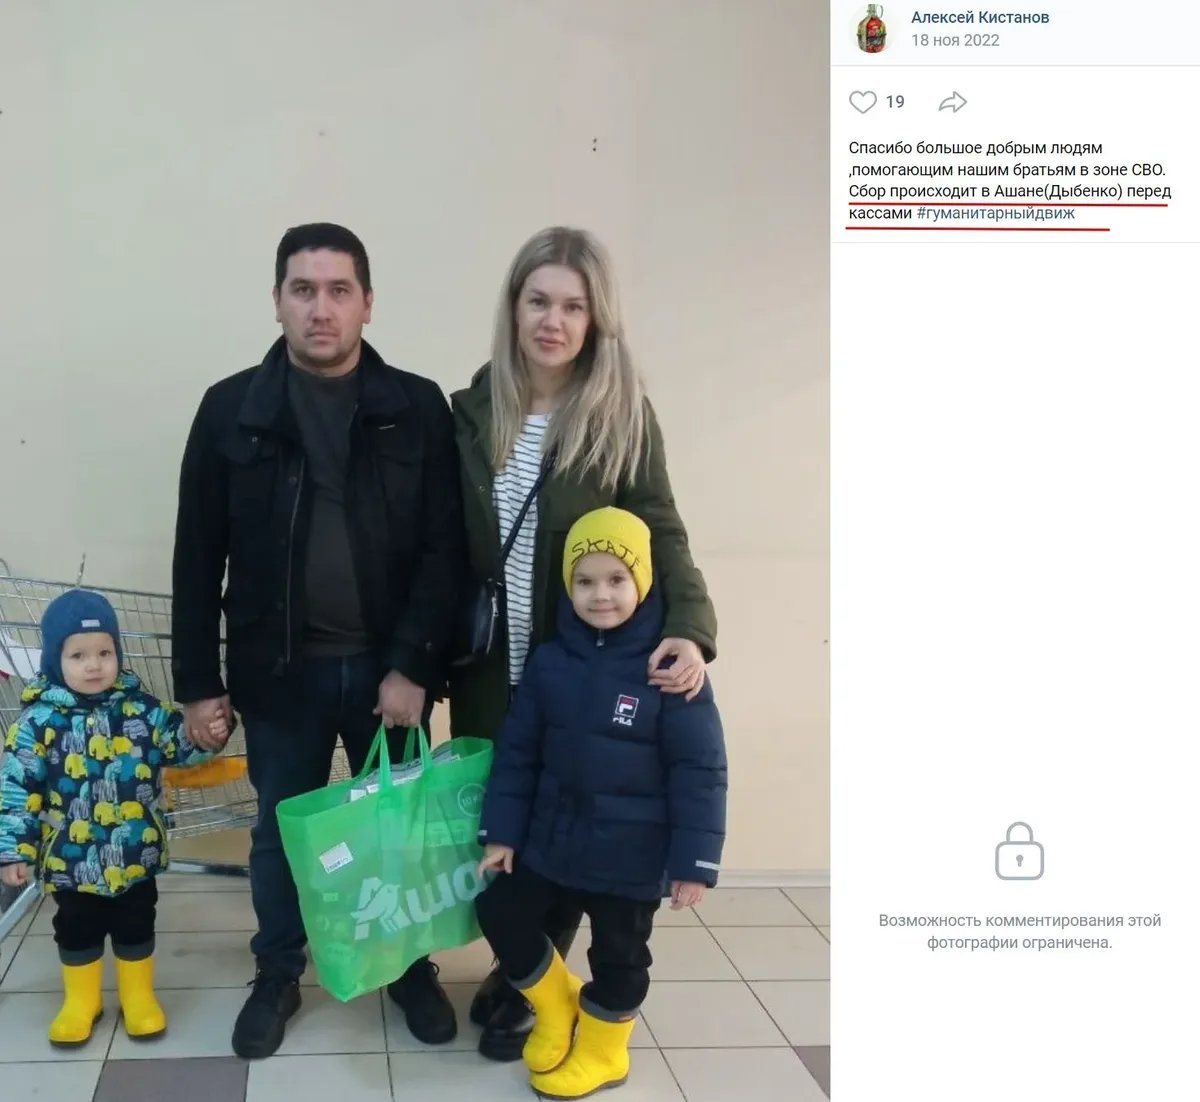 Thank you very much to all the kild people who help our brothers in the special military operation zone. The collection takes place in Auchan (Dybenko) before the tills. Screenshot: The Insider